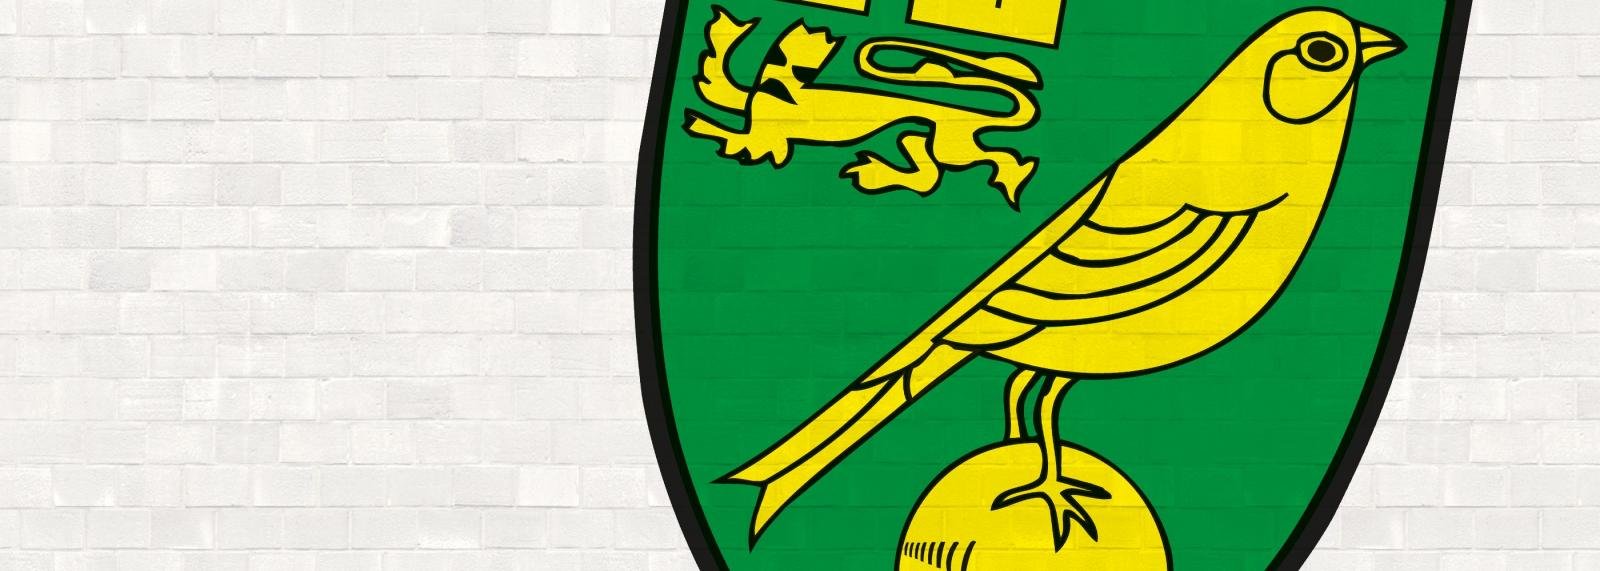 Norwich’s promotion aspirations could depend on which players they keep